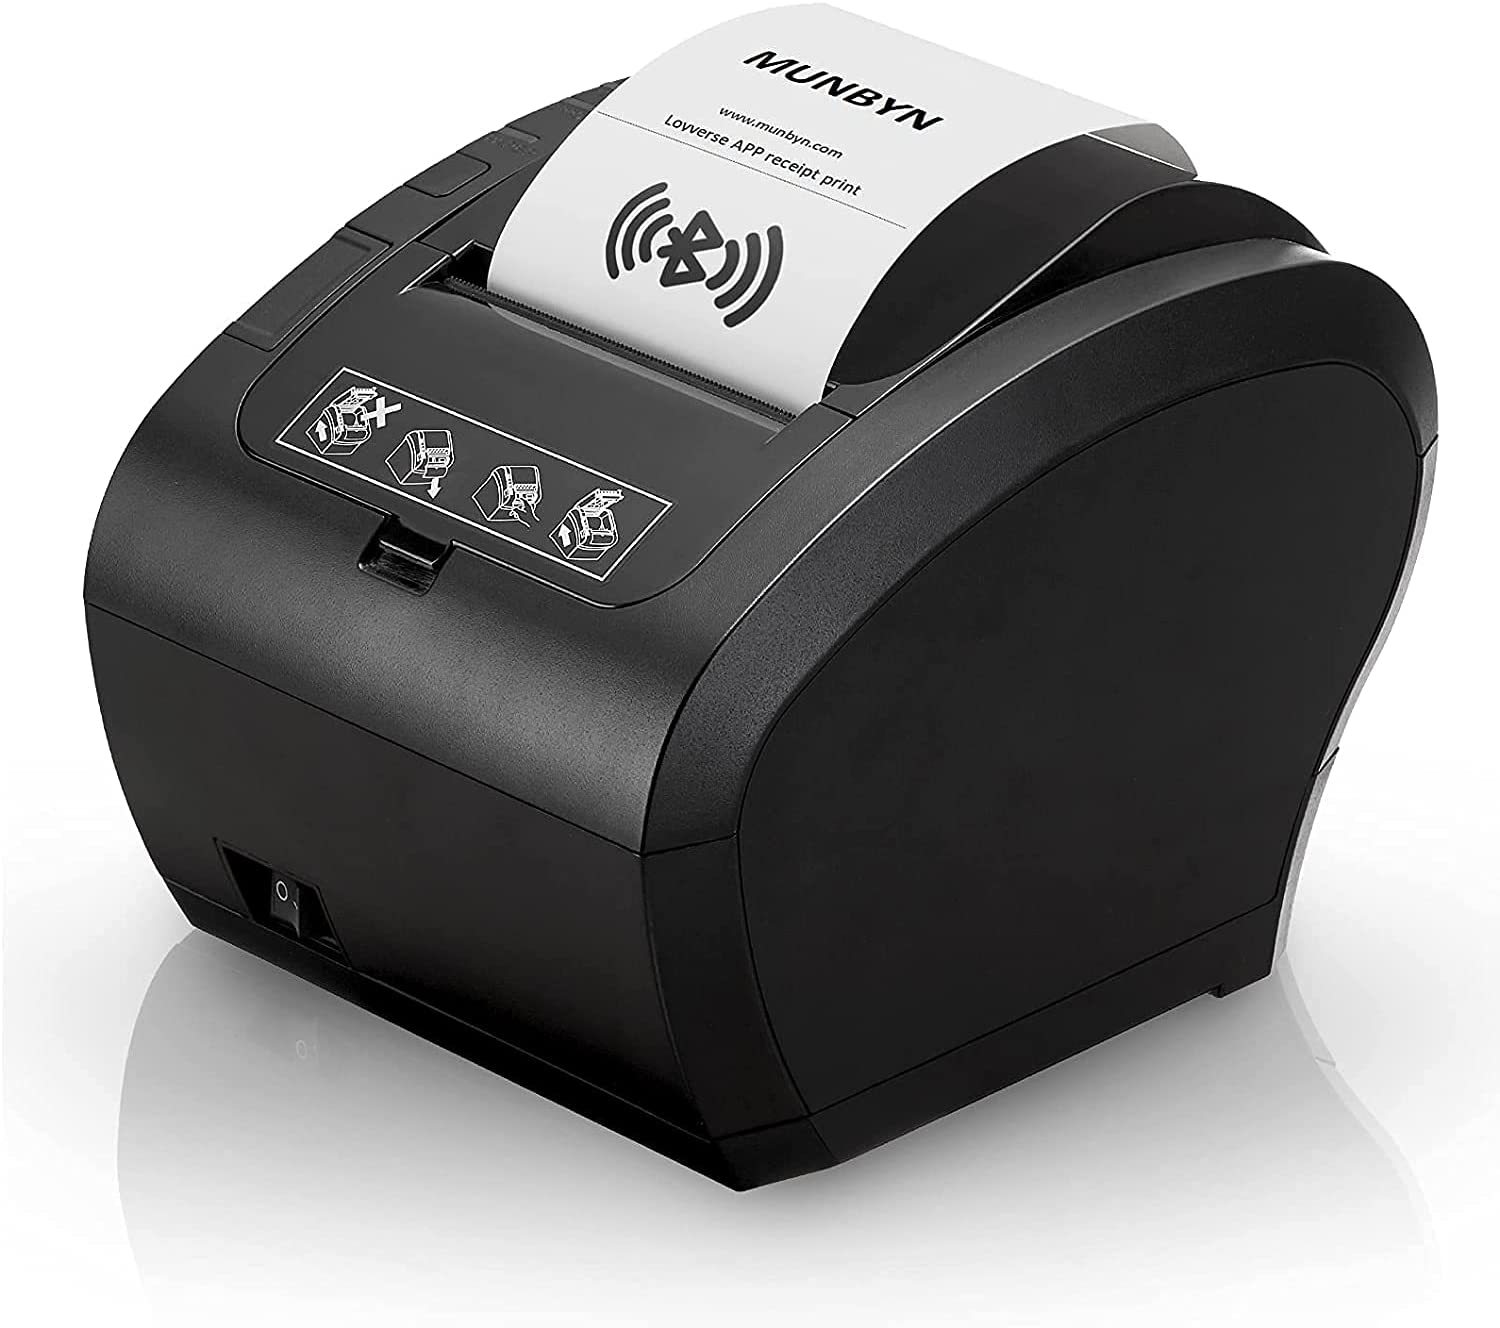 Primary image for 80Mm Receipt Printer, Direct Thermal Printer With Usb, Serial Ethernet,